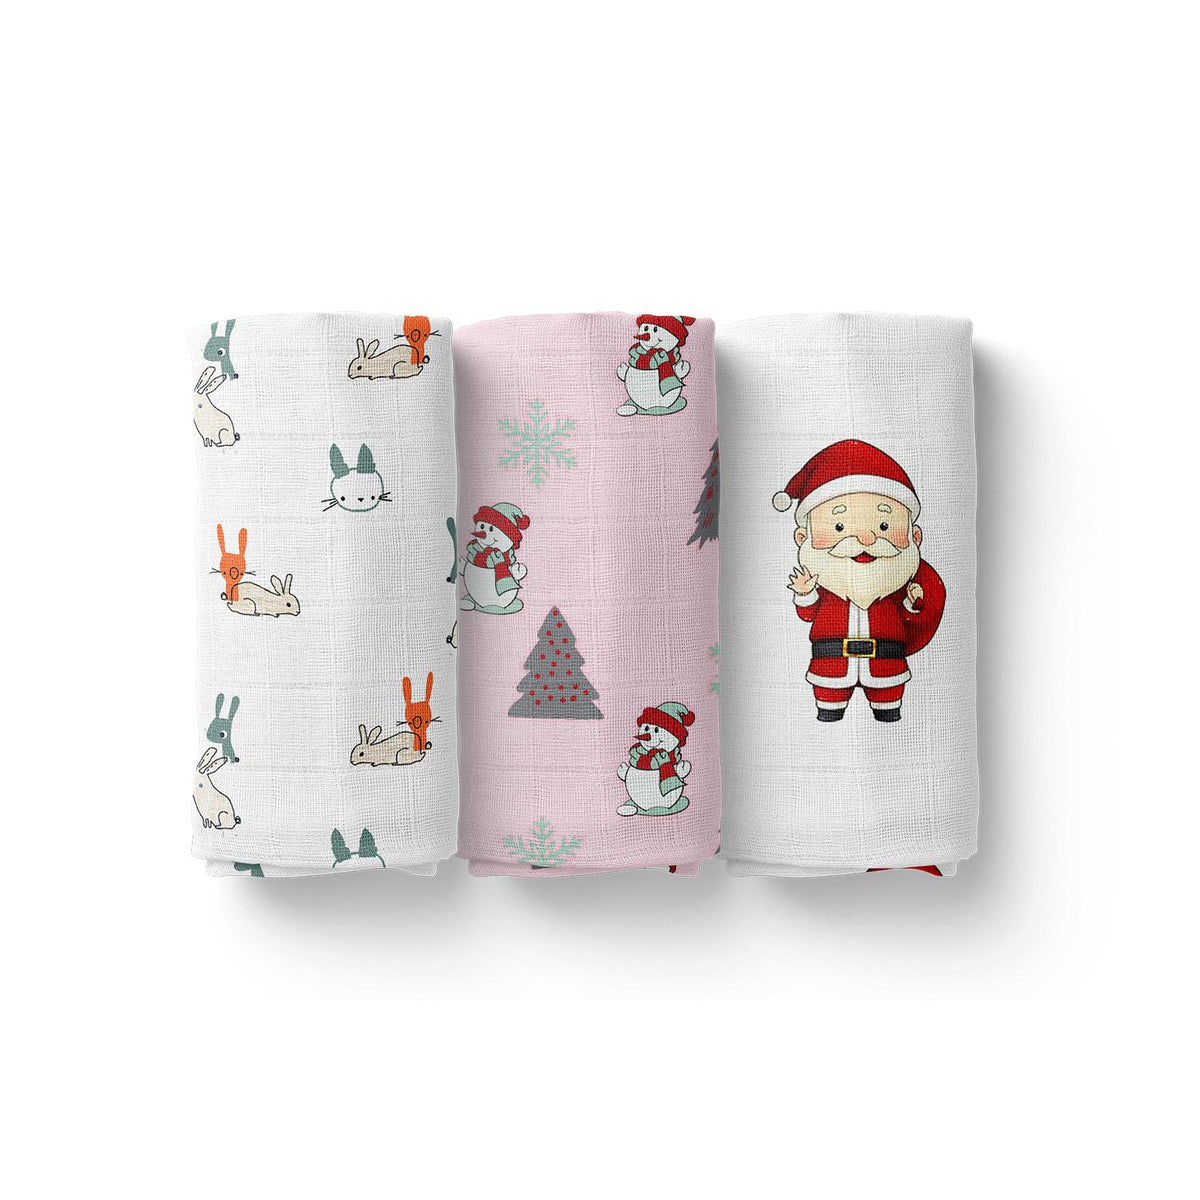 Baby Muslin Swaddle - 100x100 cm- Pack of 3- Santa, Snowman and Rabbit